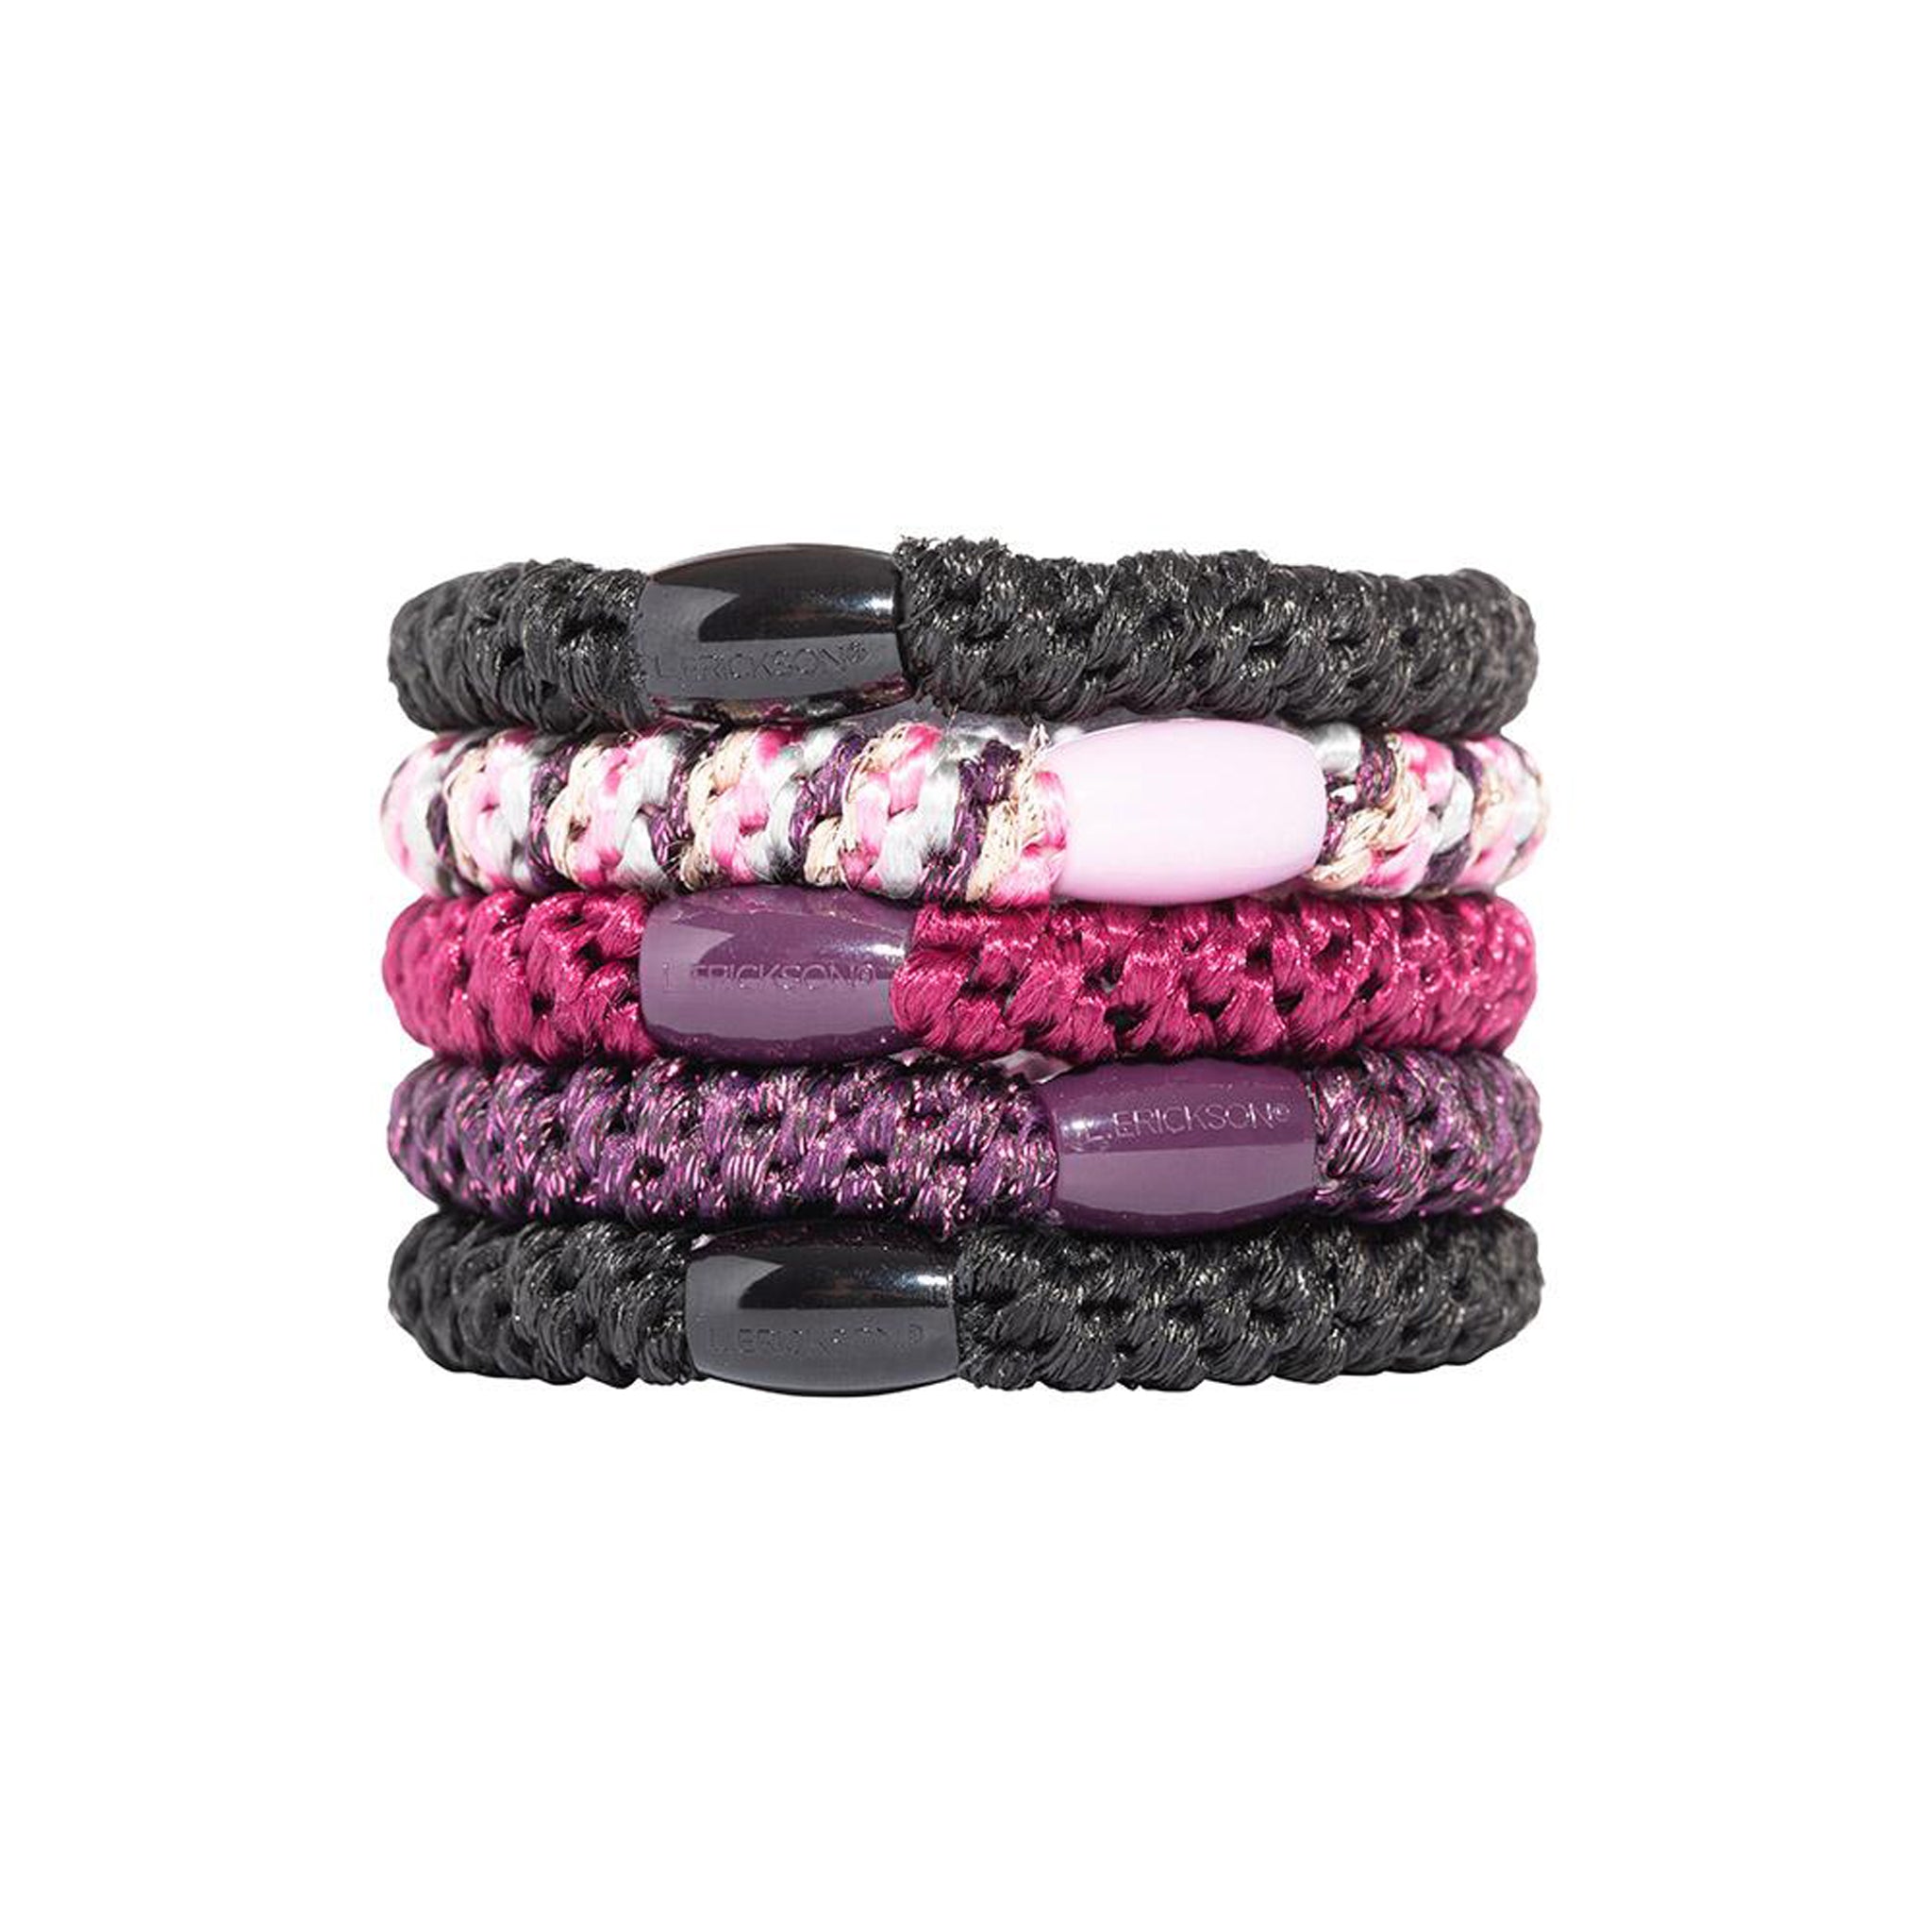 L. Erickson Plush Grab and Go Ponytail Holder Hair Ties in Reign 5 Pack